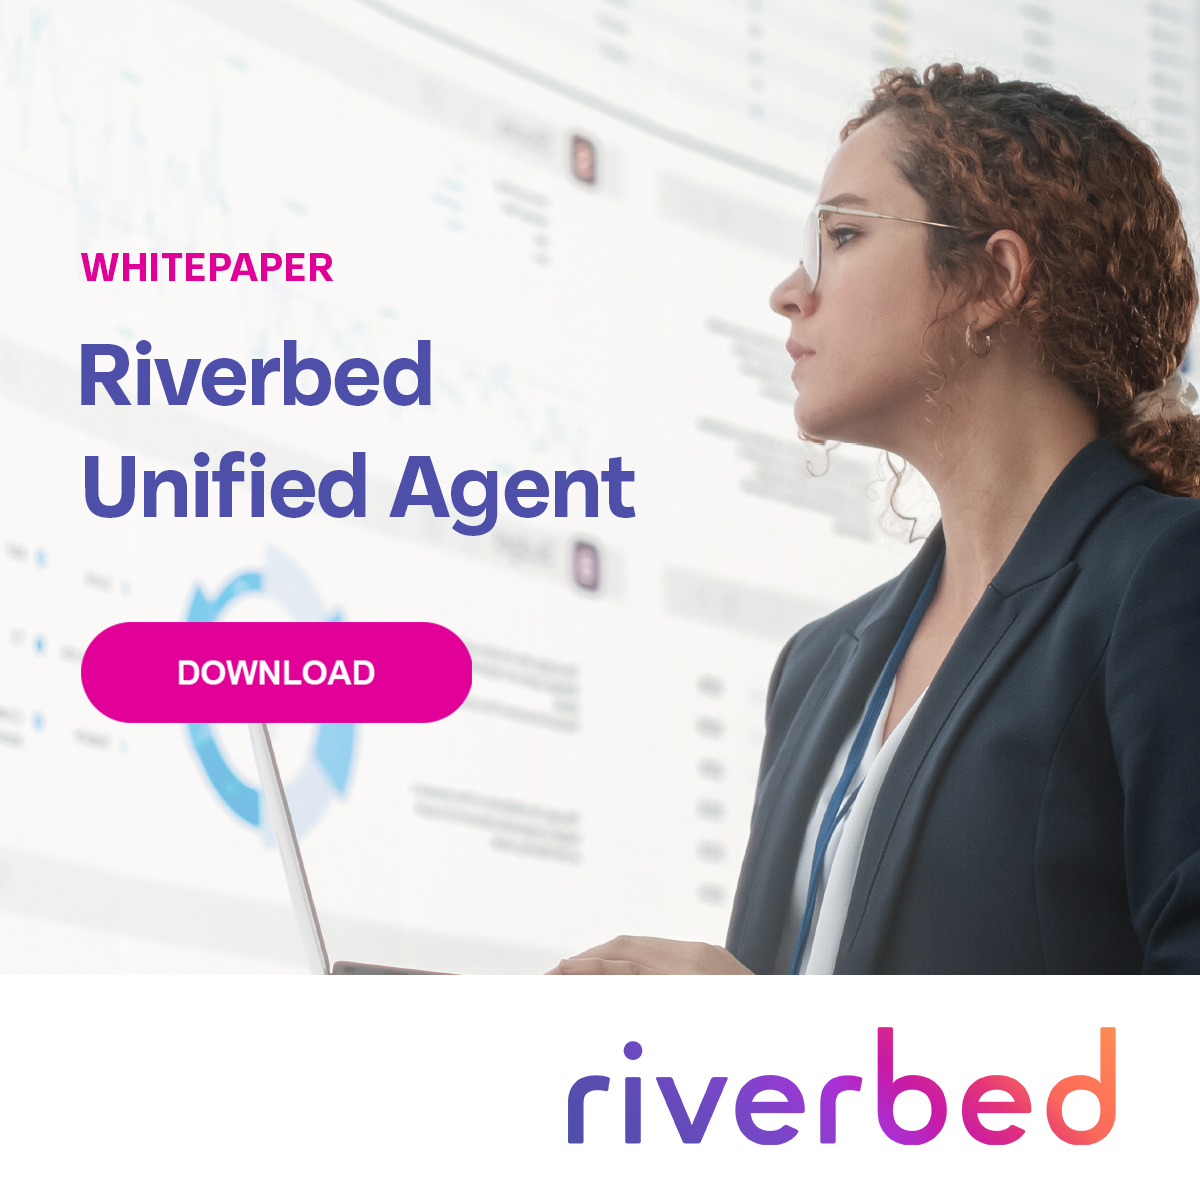 Introducing Riverbed Unified Agent: A single agent management tool that allows #IT to easily deploy, update and manage Riverbed and select third-party agent-based visibility modules. ✔️ Check out our white paper to learn more: rvbd.ly/4dDsslk #AI #userexperience